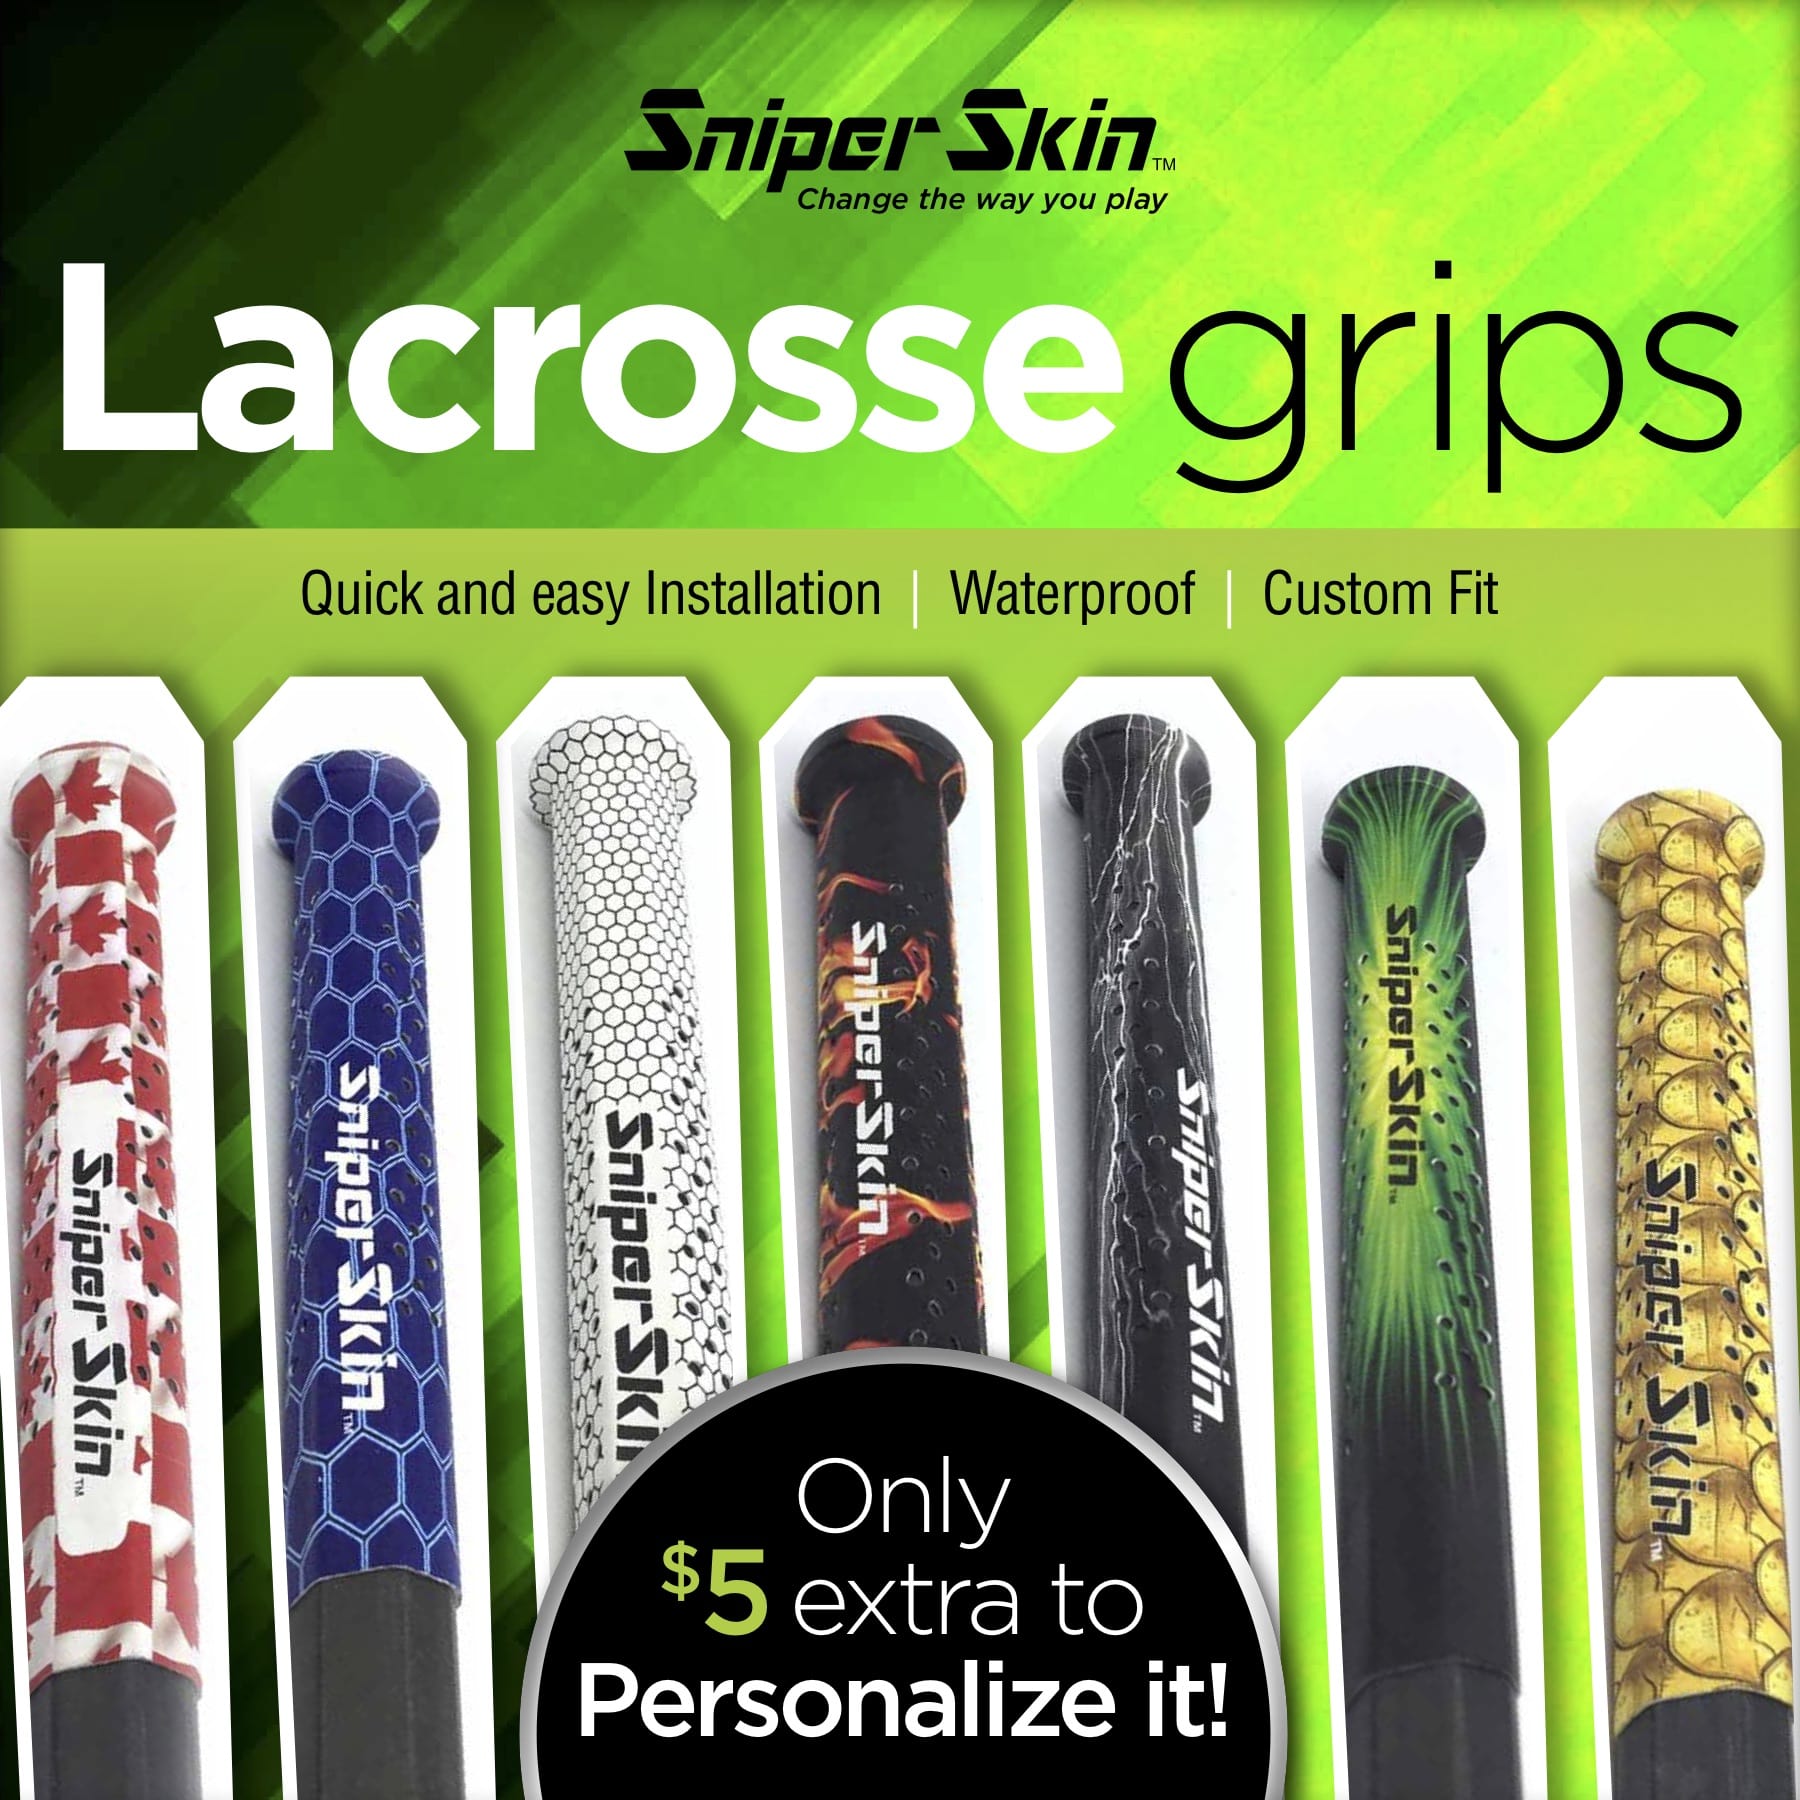 Start Your Lacrosse season with Sniper Skin!